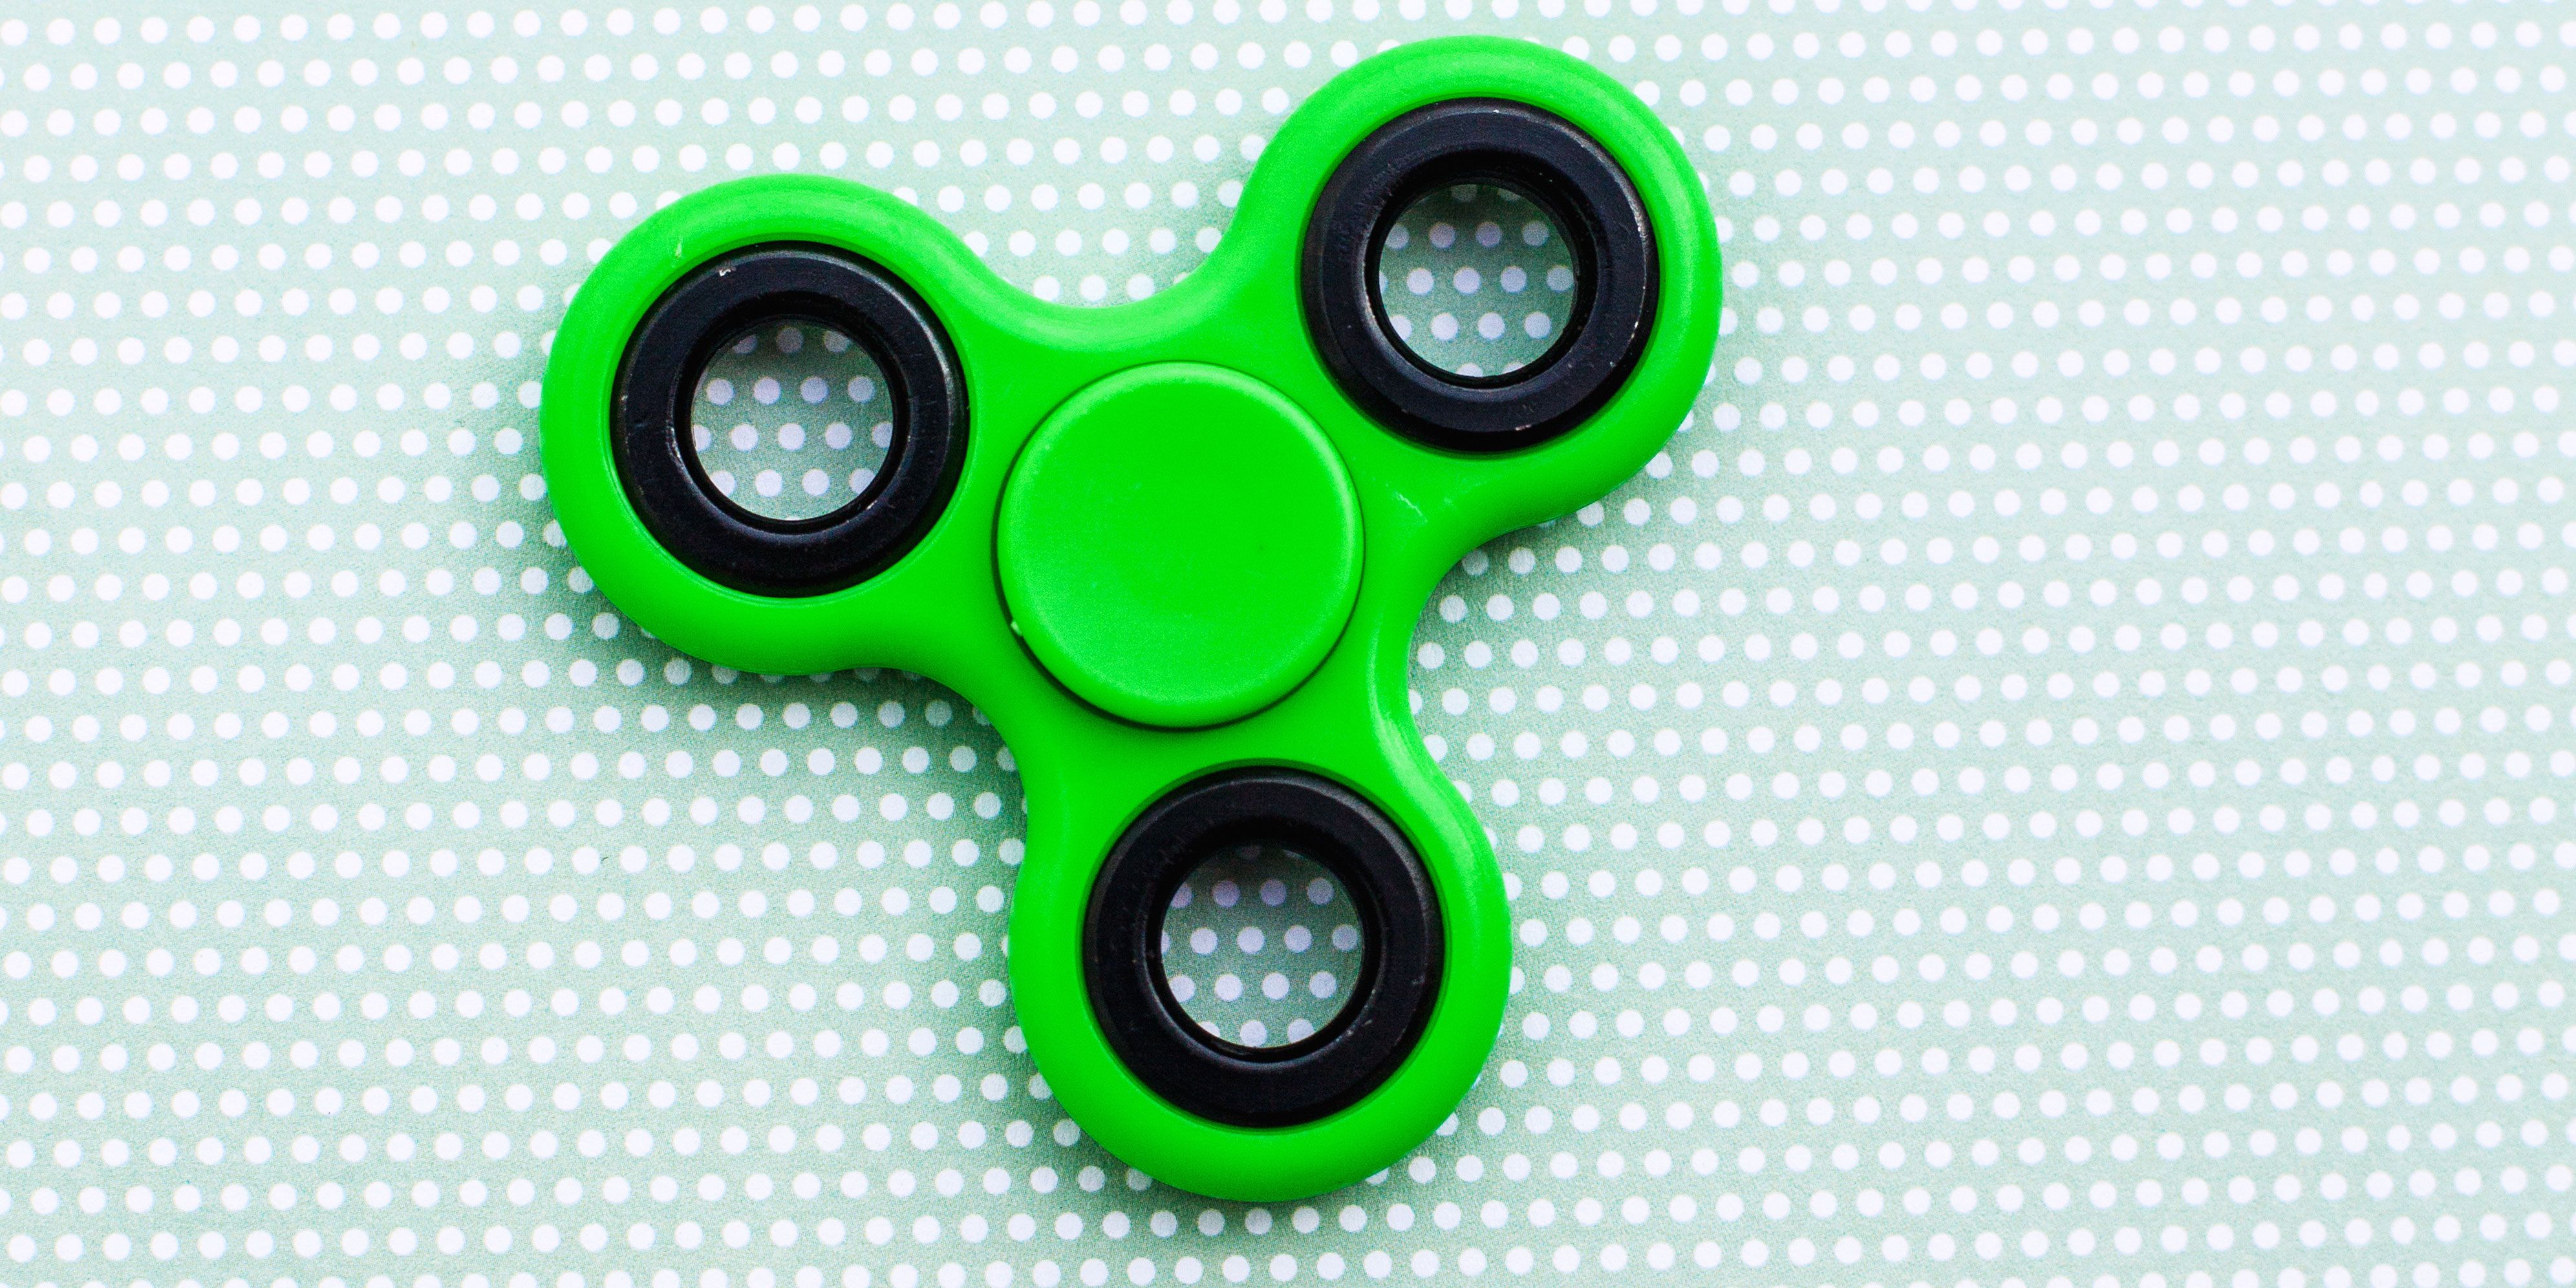 Fidget spinners: Be careful with those, government safety group warns